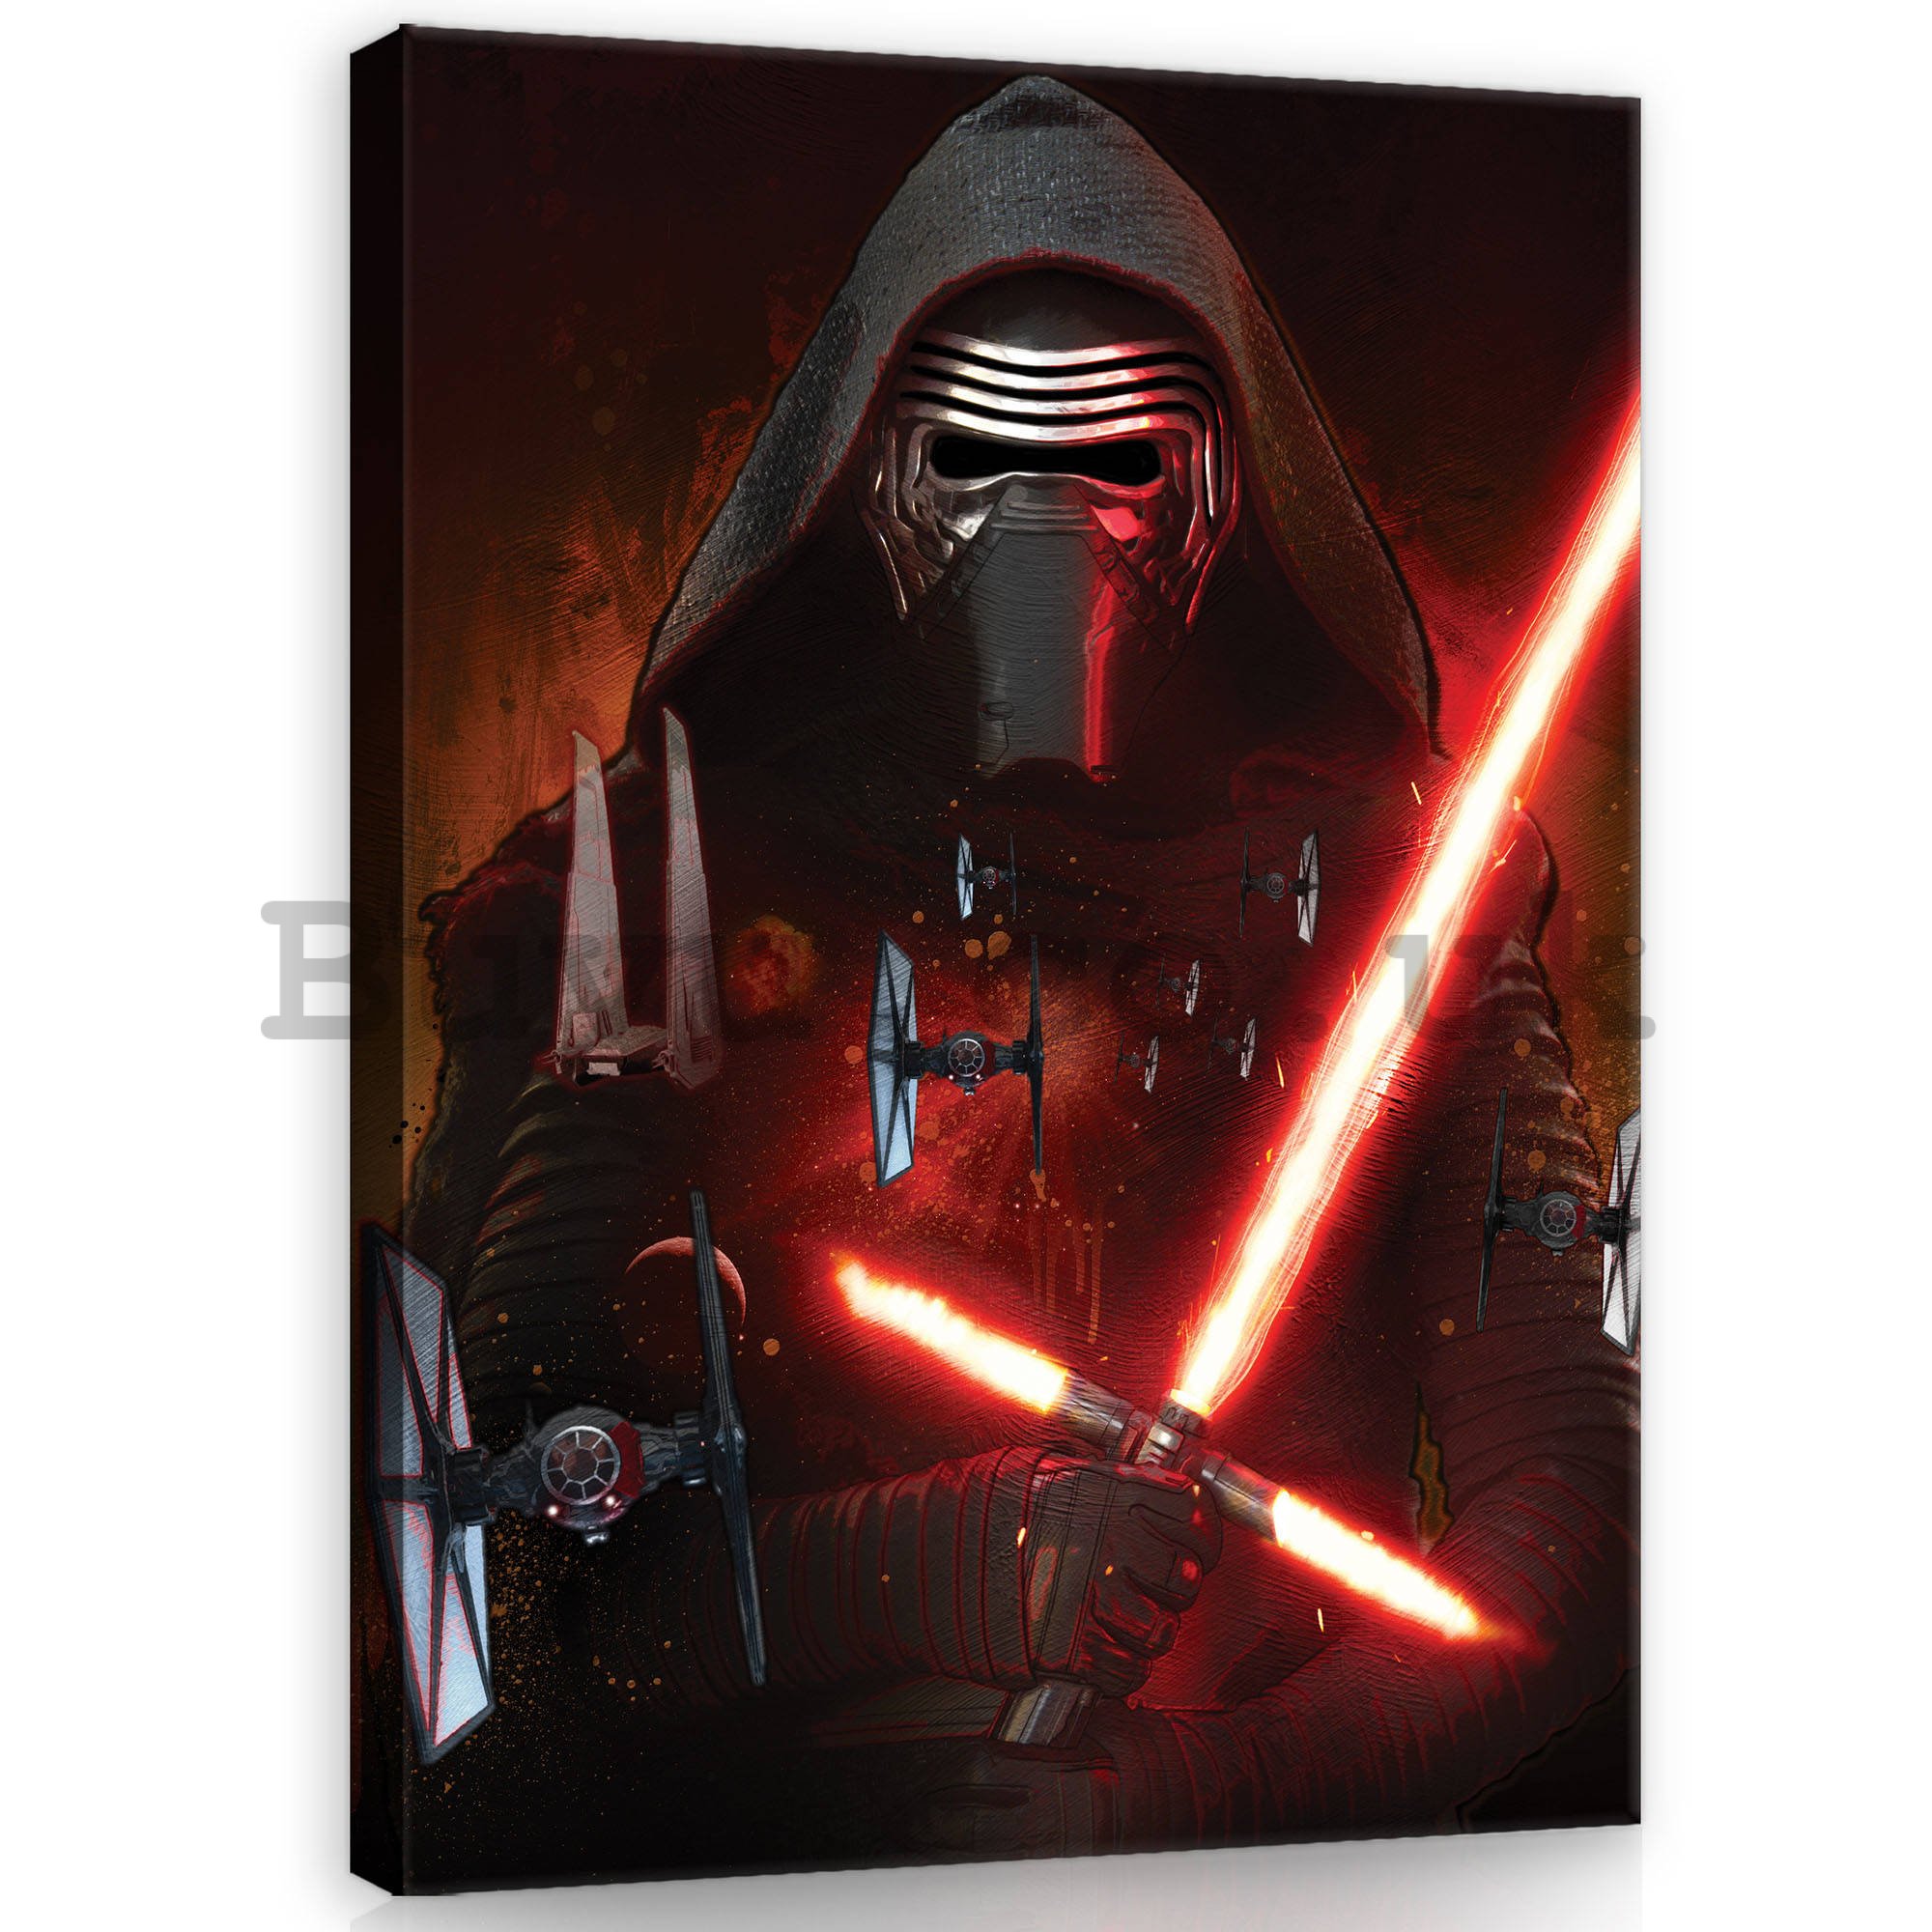 Painting on canvas: Star Wars Kylo Ren & TIE fighters - 60x80 cm